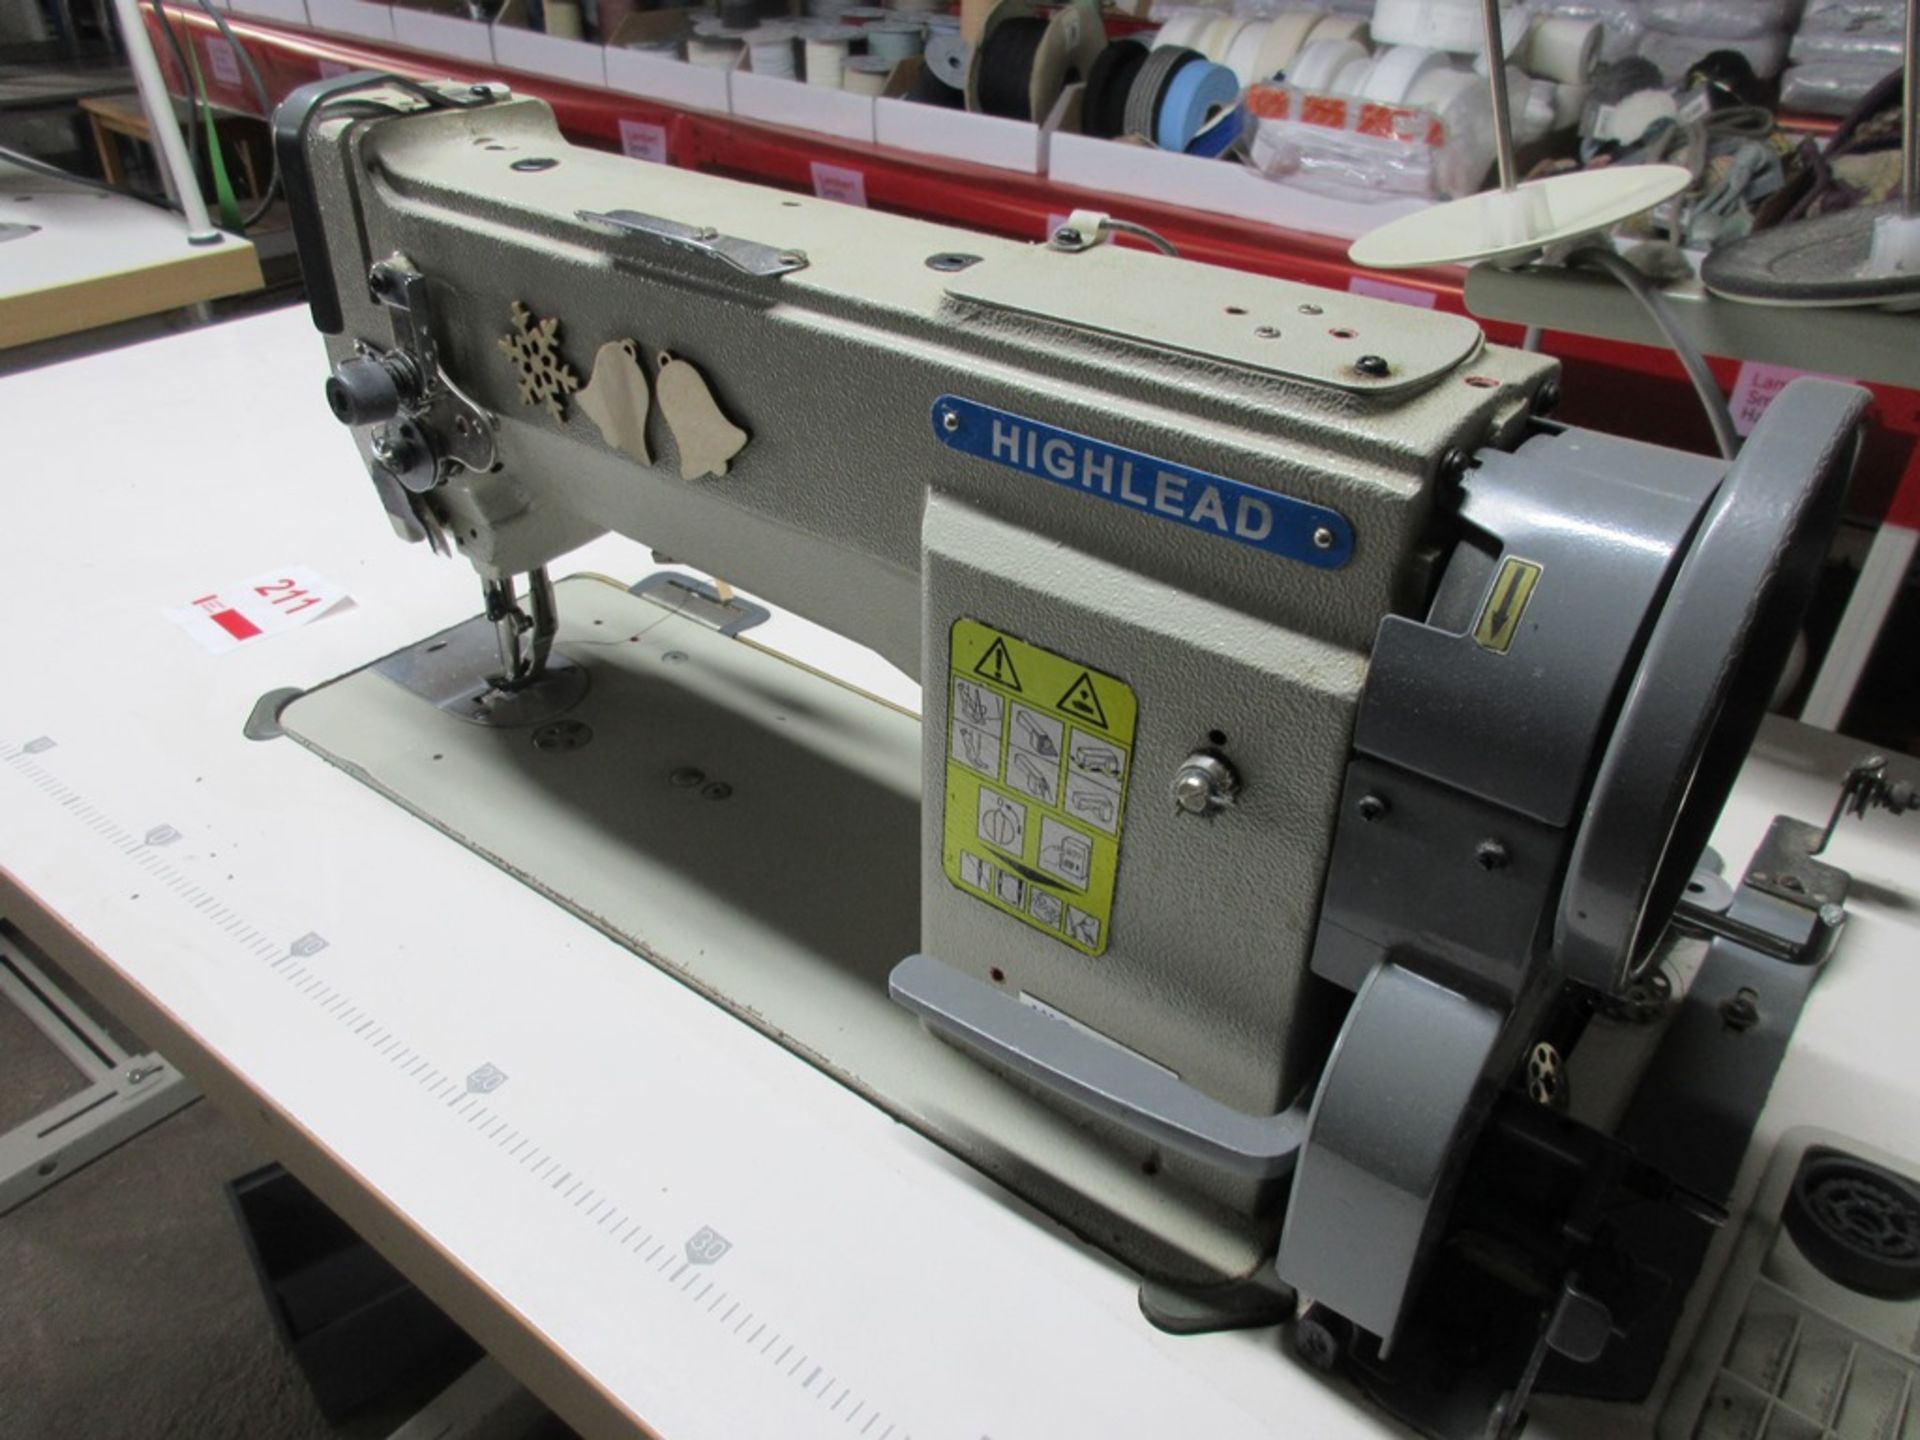 Highlead GC0618-1-SC flat bed sewing machine, 240v - Image 3 of 4